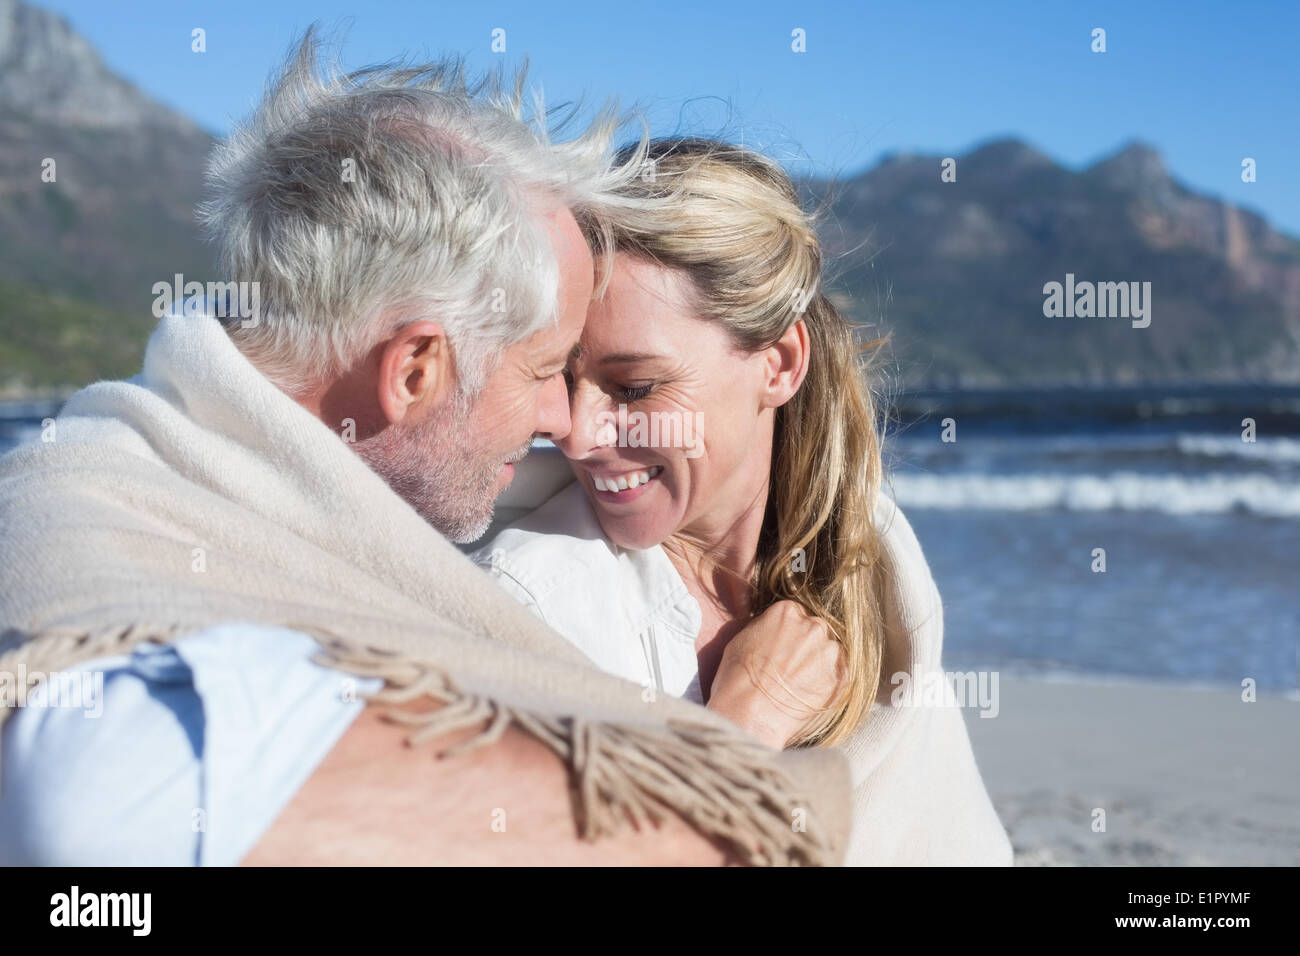 Smiling couple sitting on the beach under blanket Stock Photo